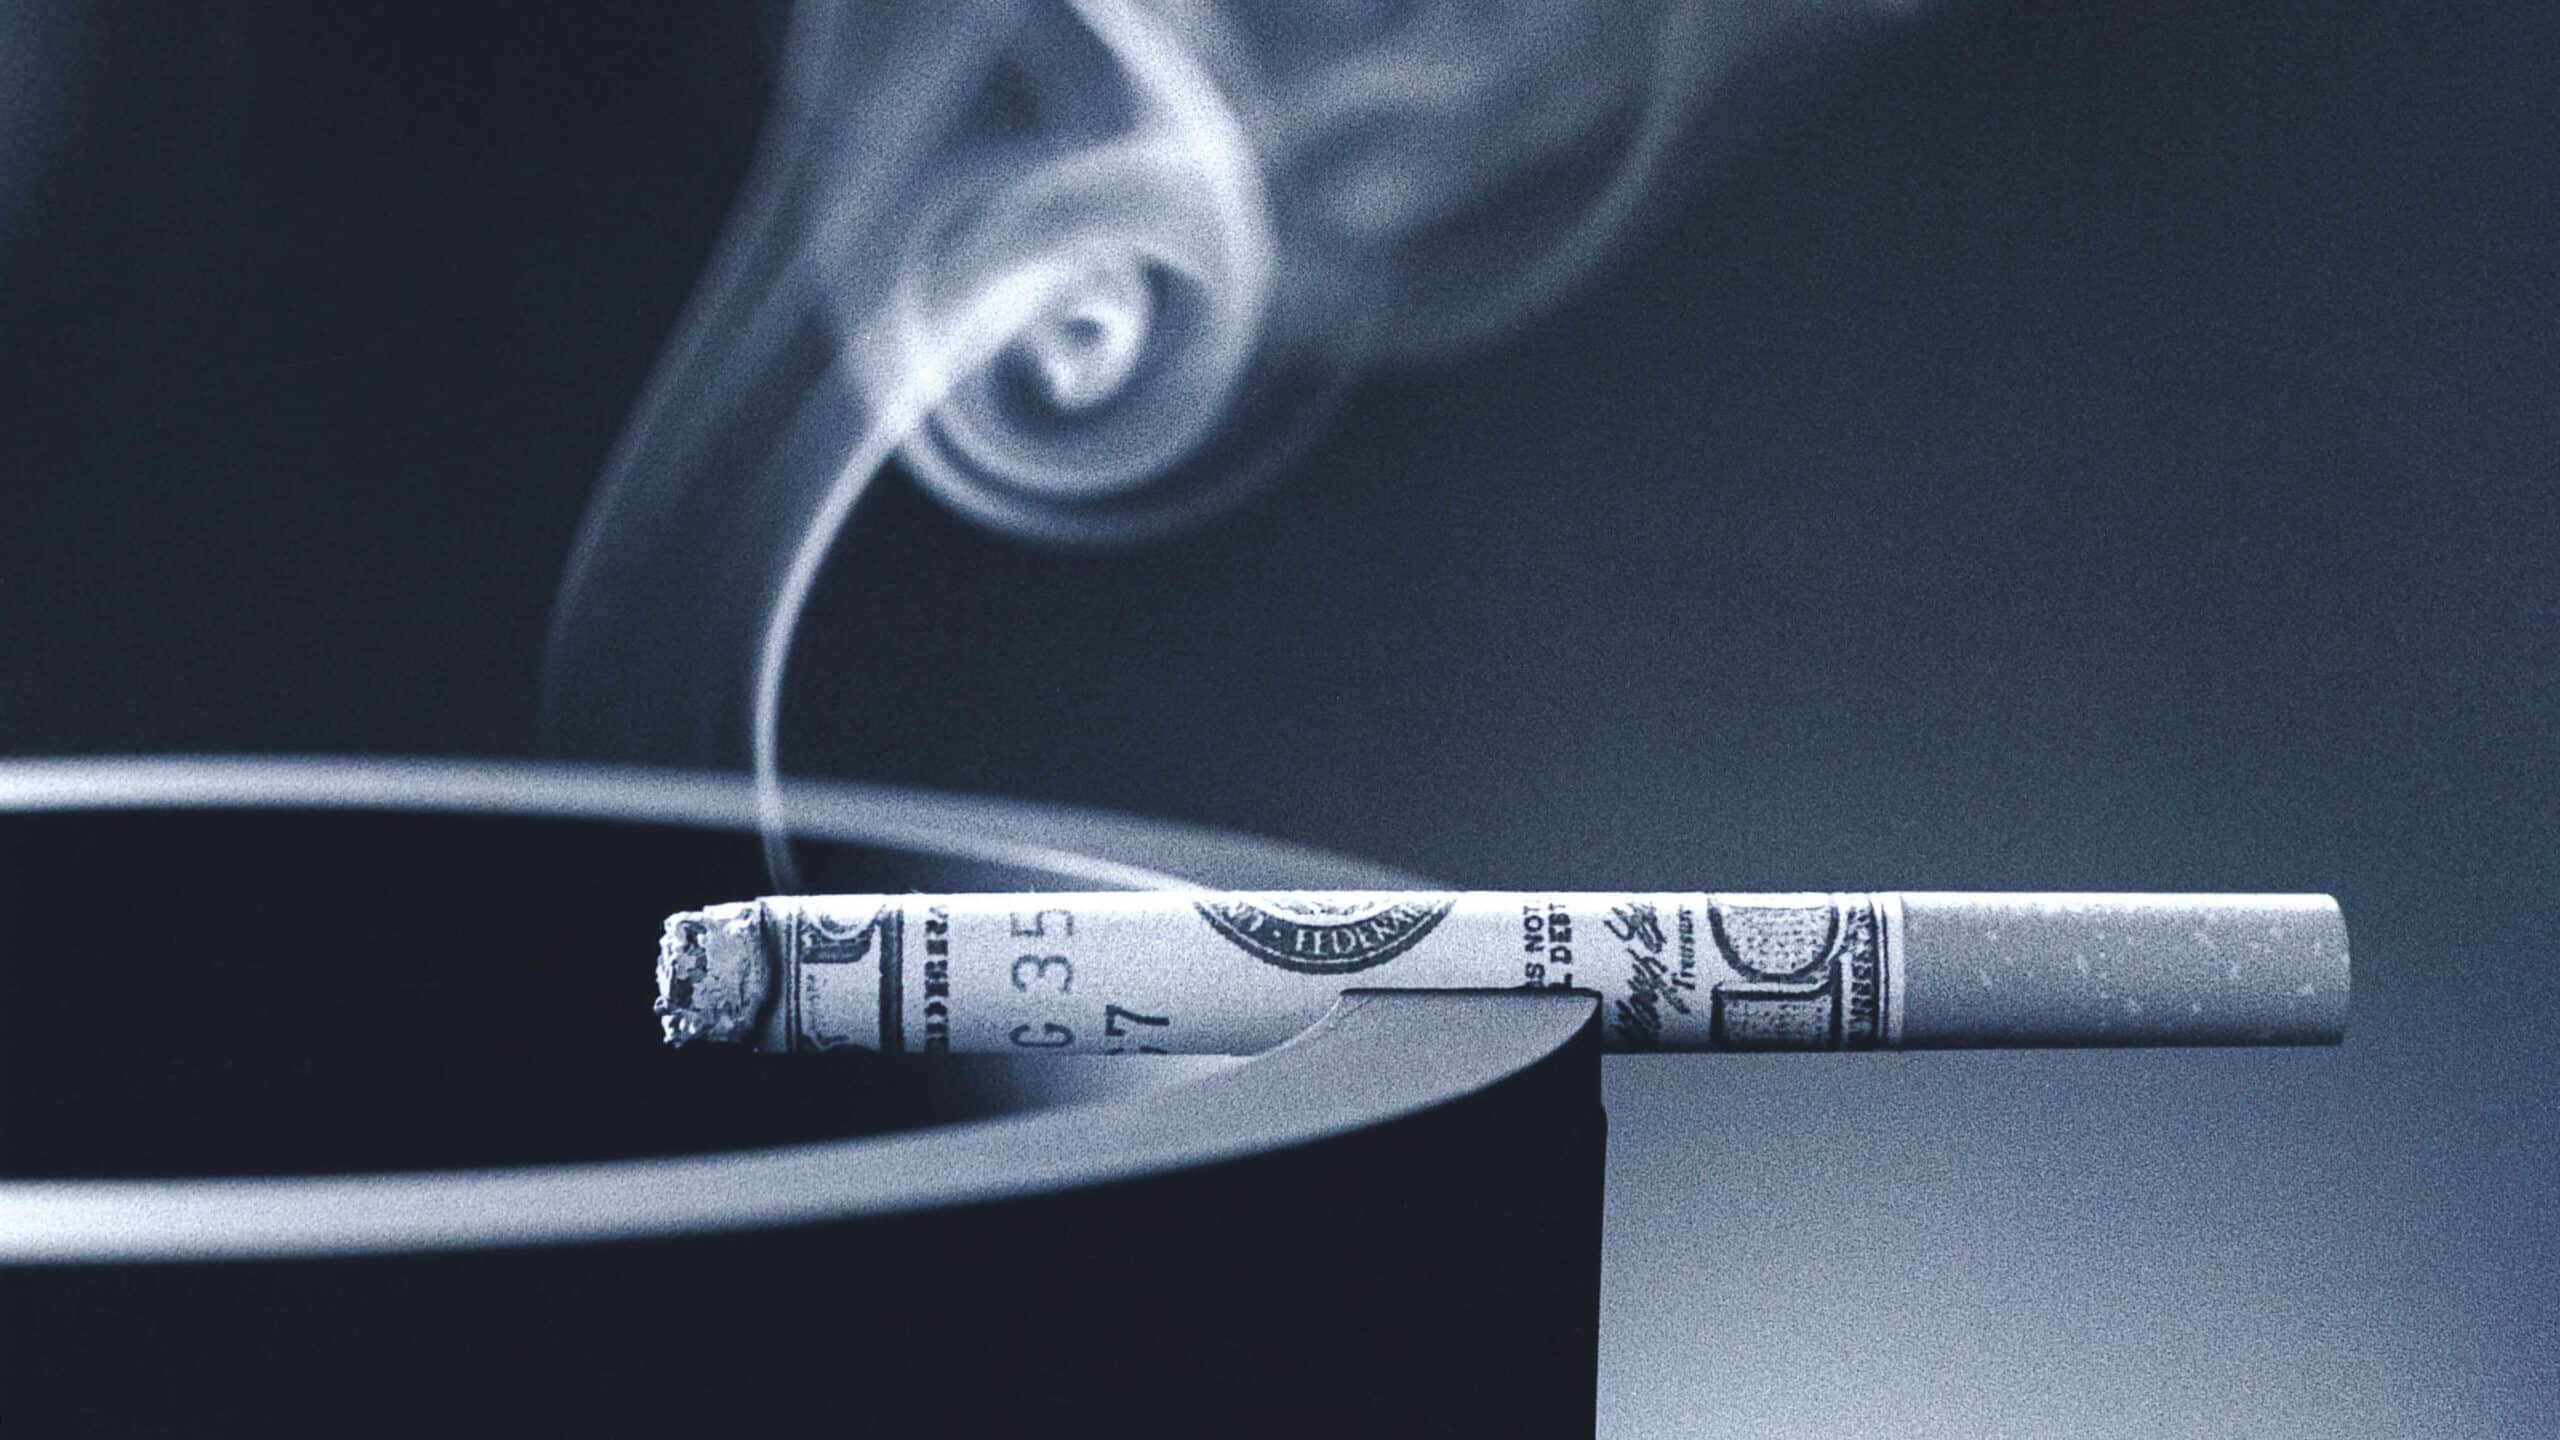 How Does Tobacco Use Negatively Impact Personal Finances